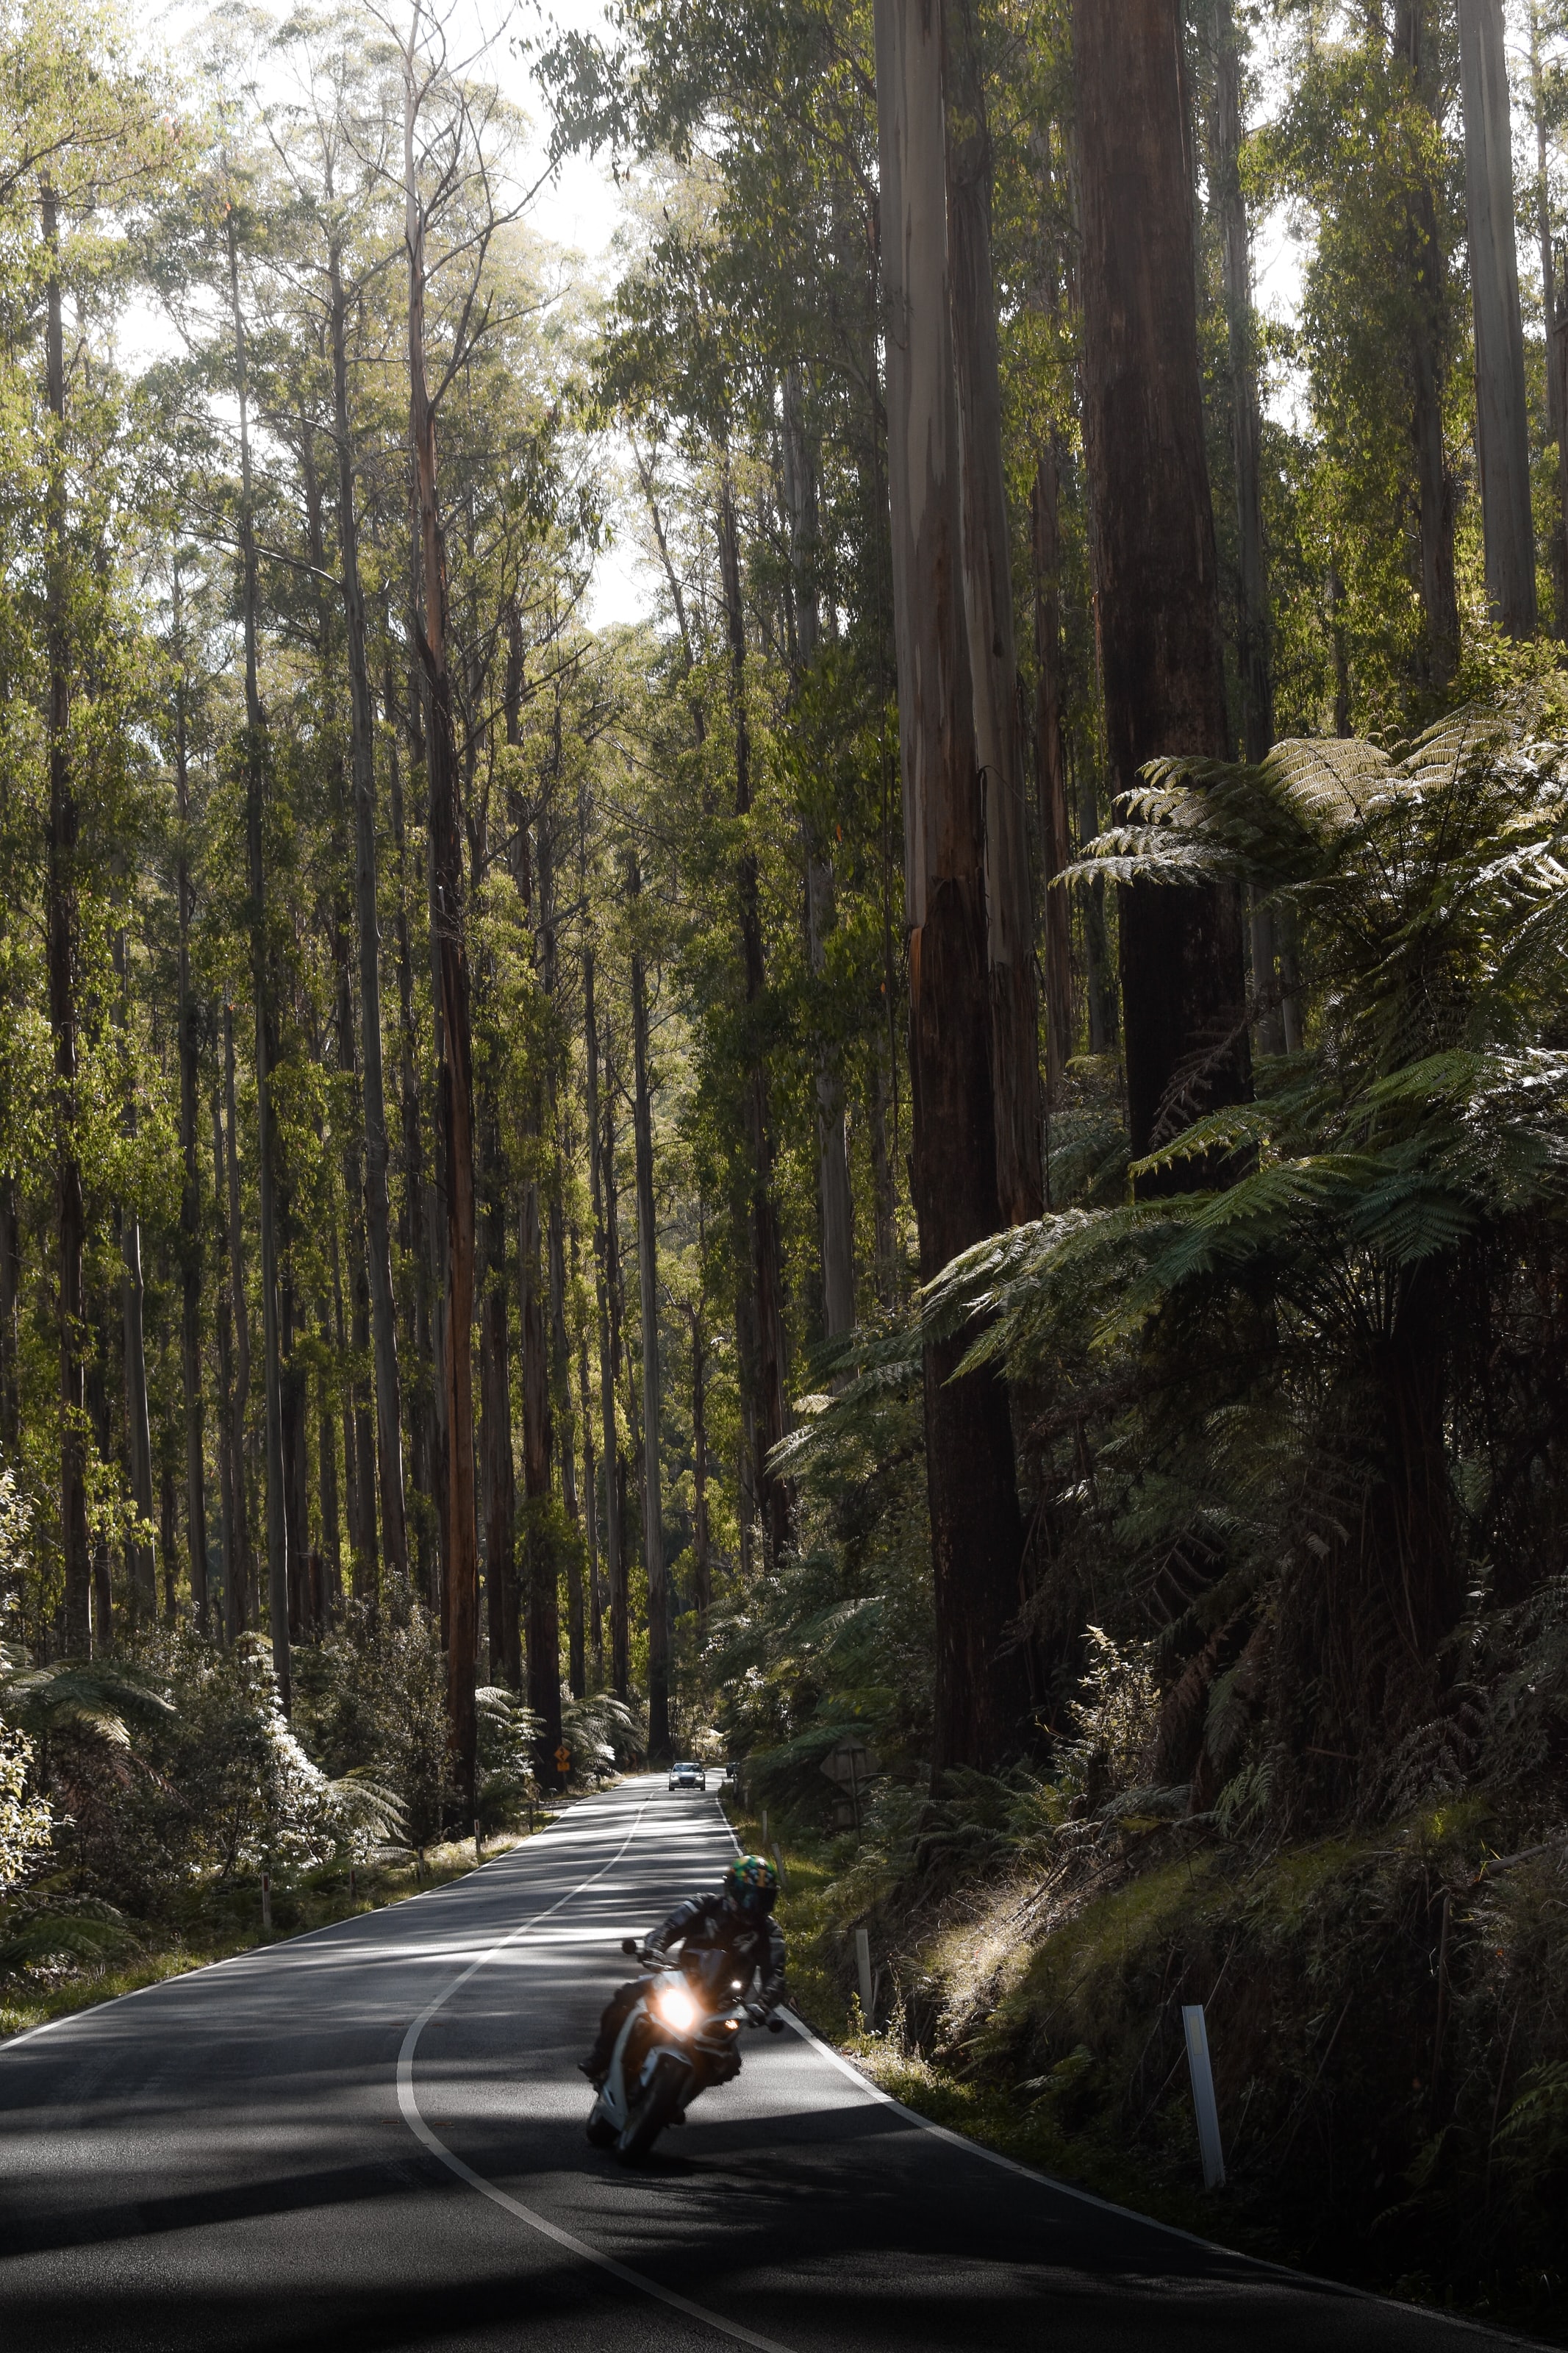 speed, motorcyclist, motorcycle, motorcycles, road, forest